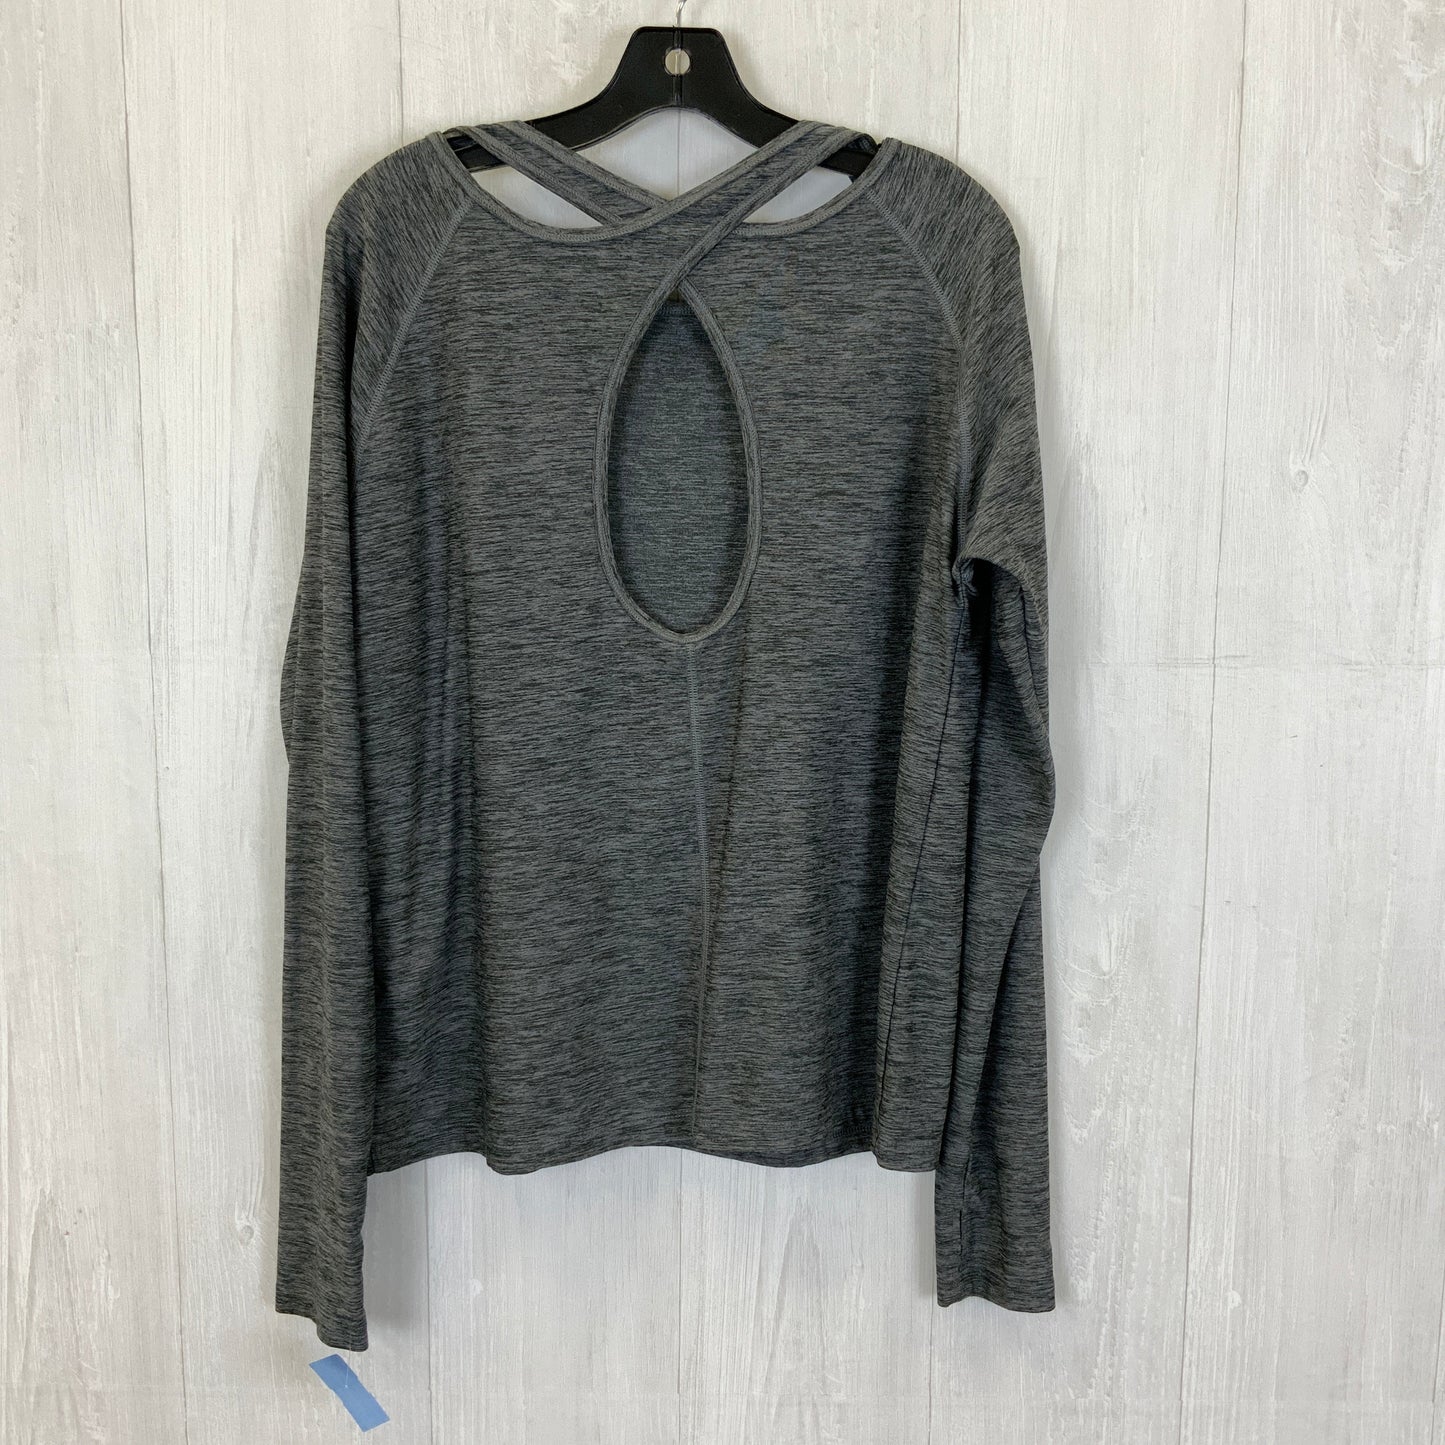 Grey Athletic Top Long Sleeve Crewneck Under Armour, Size L